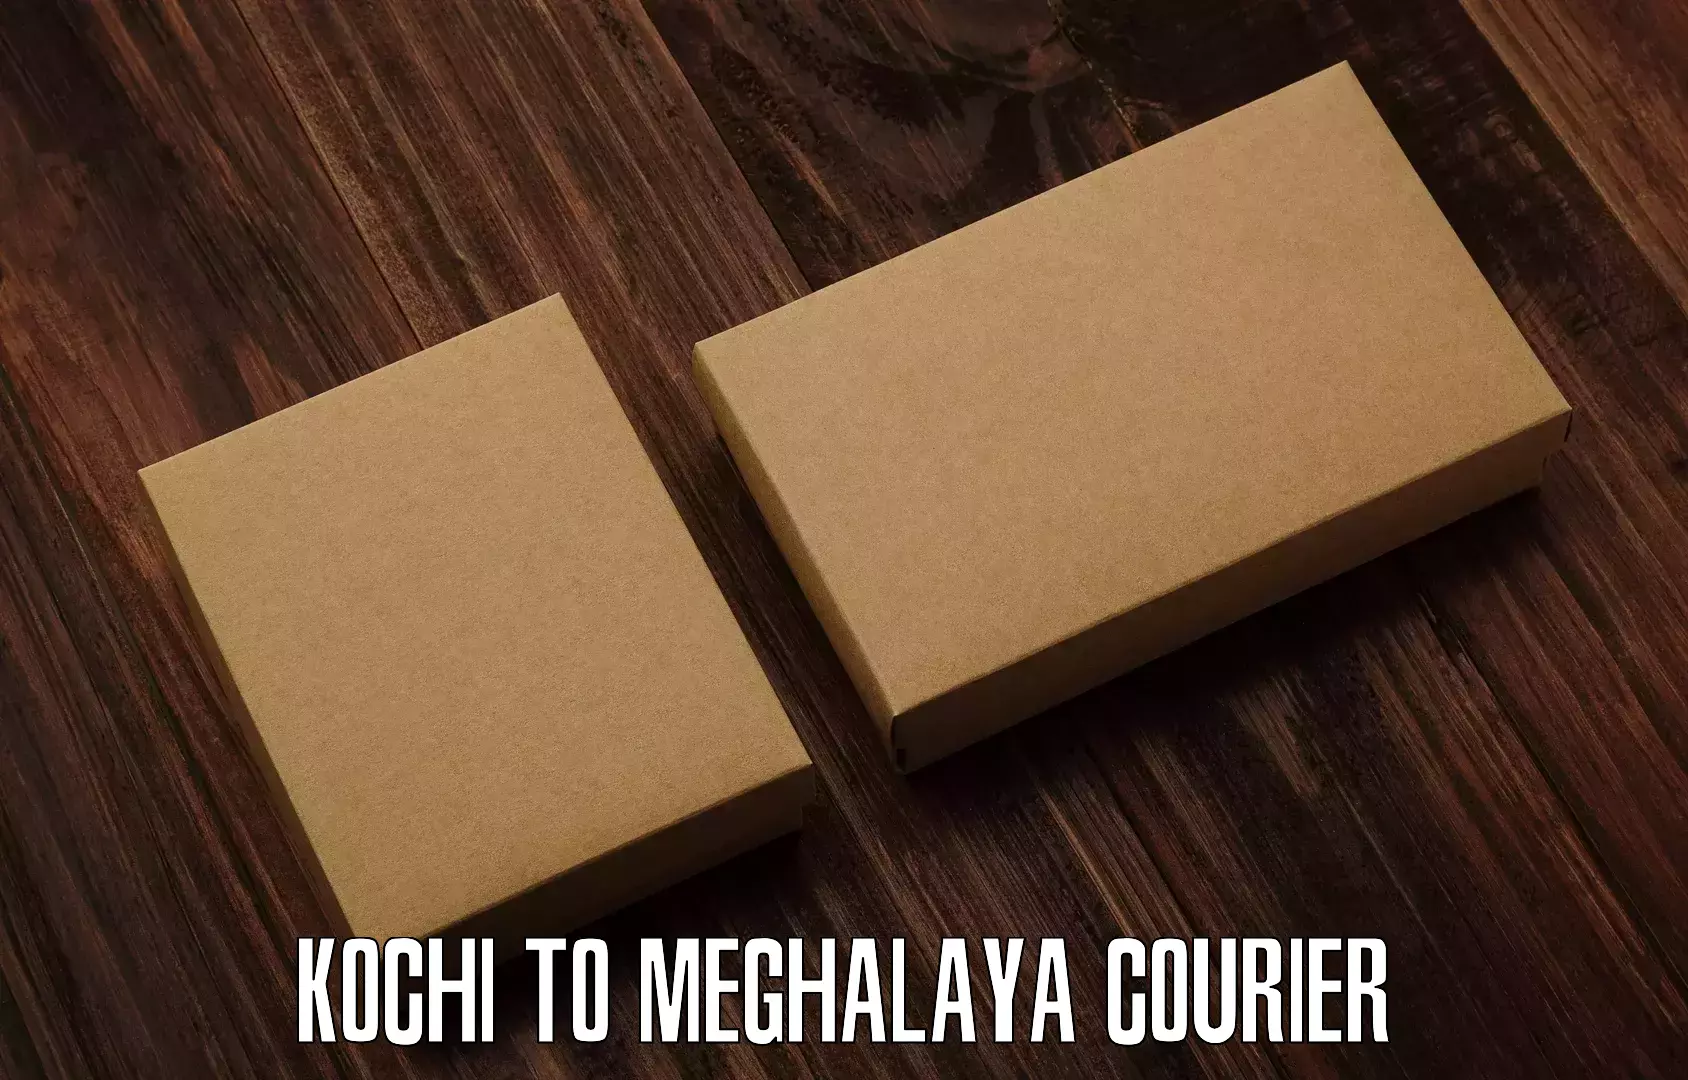 Overnight delivery services Kochi to Meghalaya